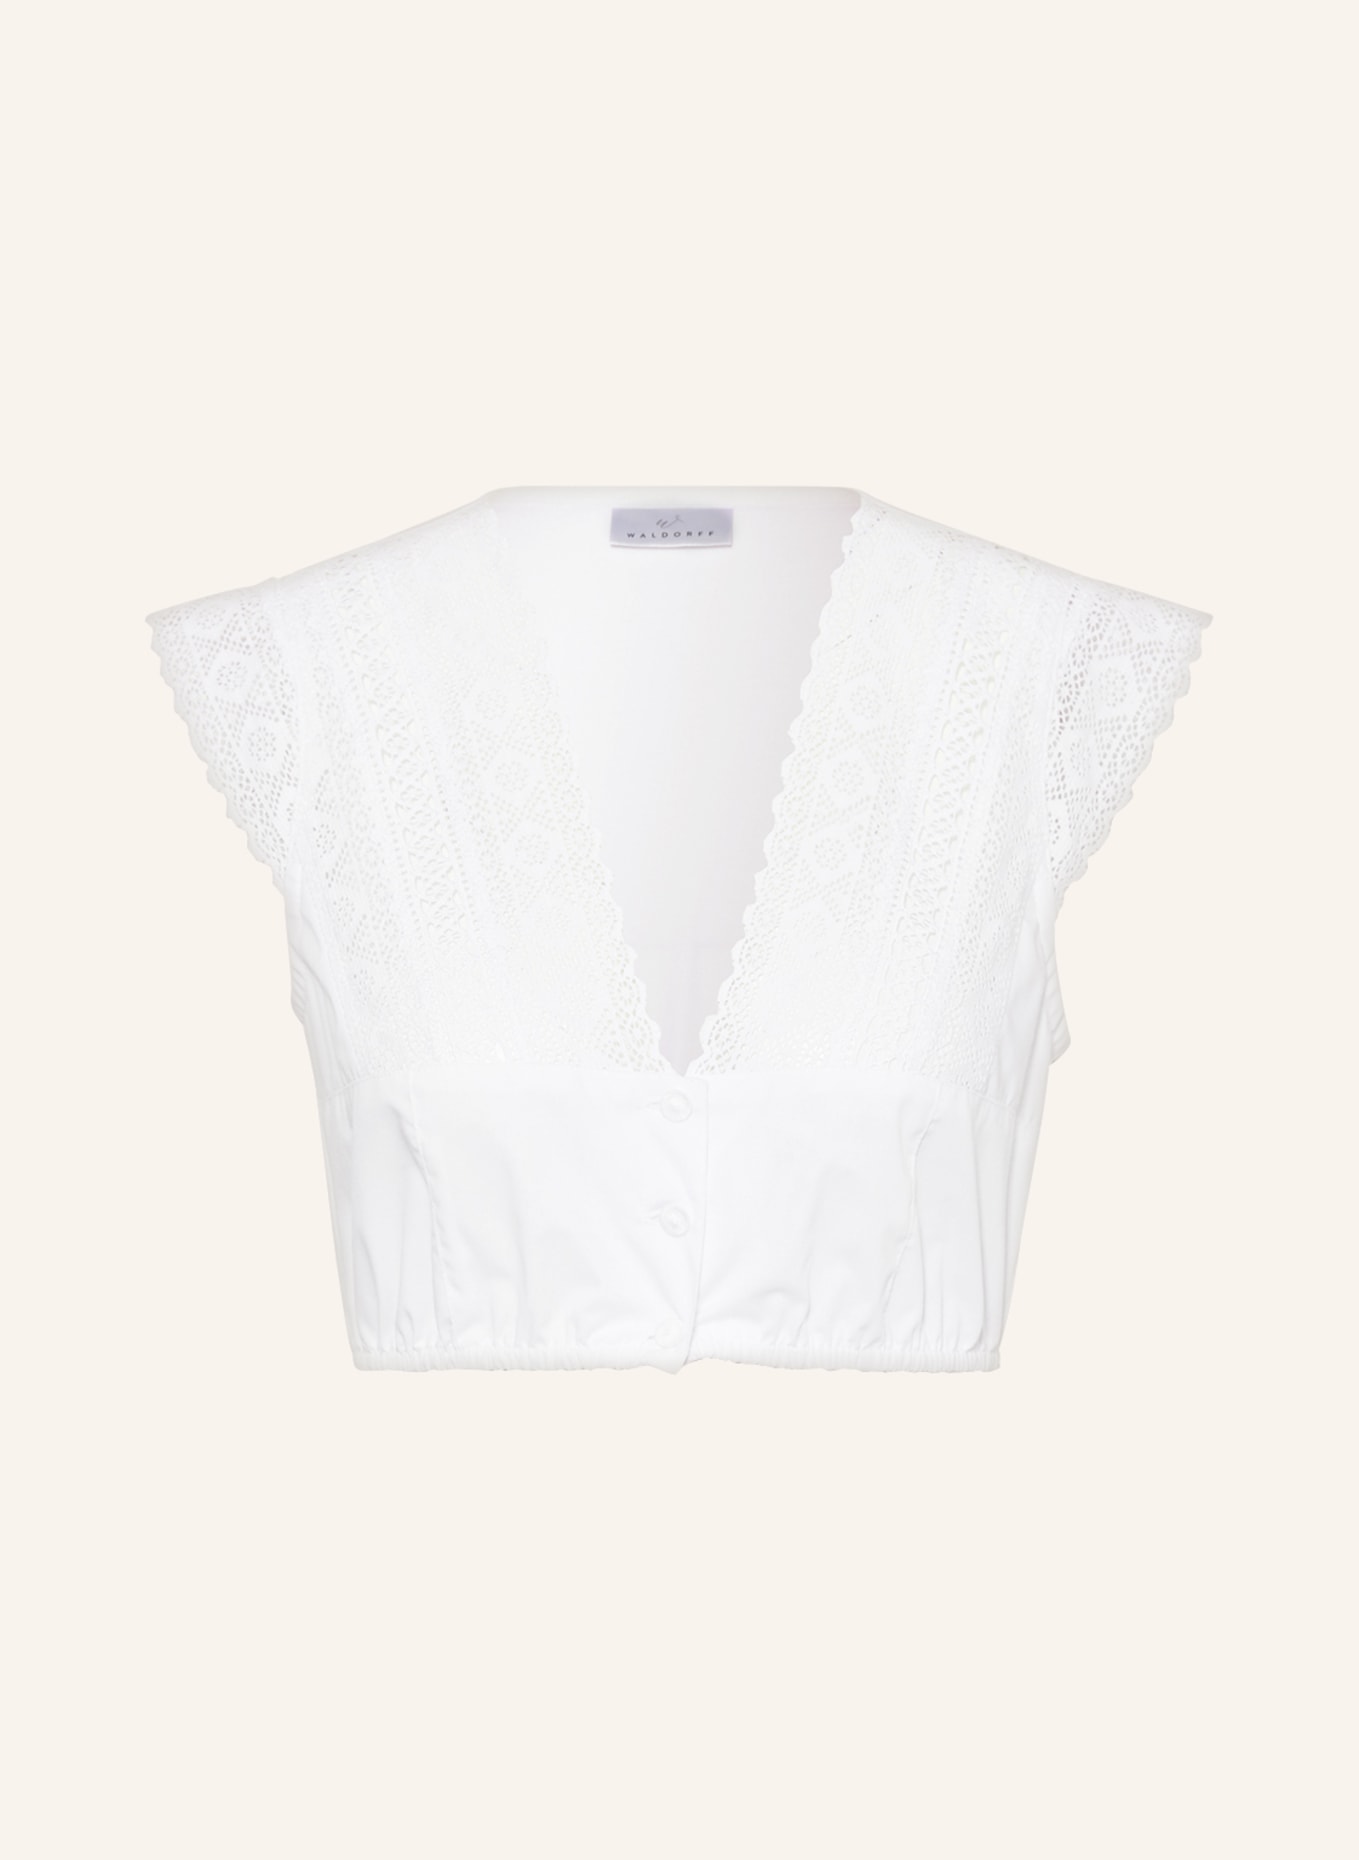 WALDORFF Dirndl blouse MINA with lace, Color: WHITE (Image 1)